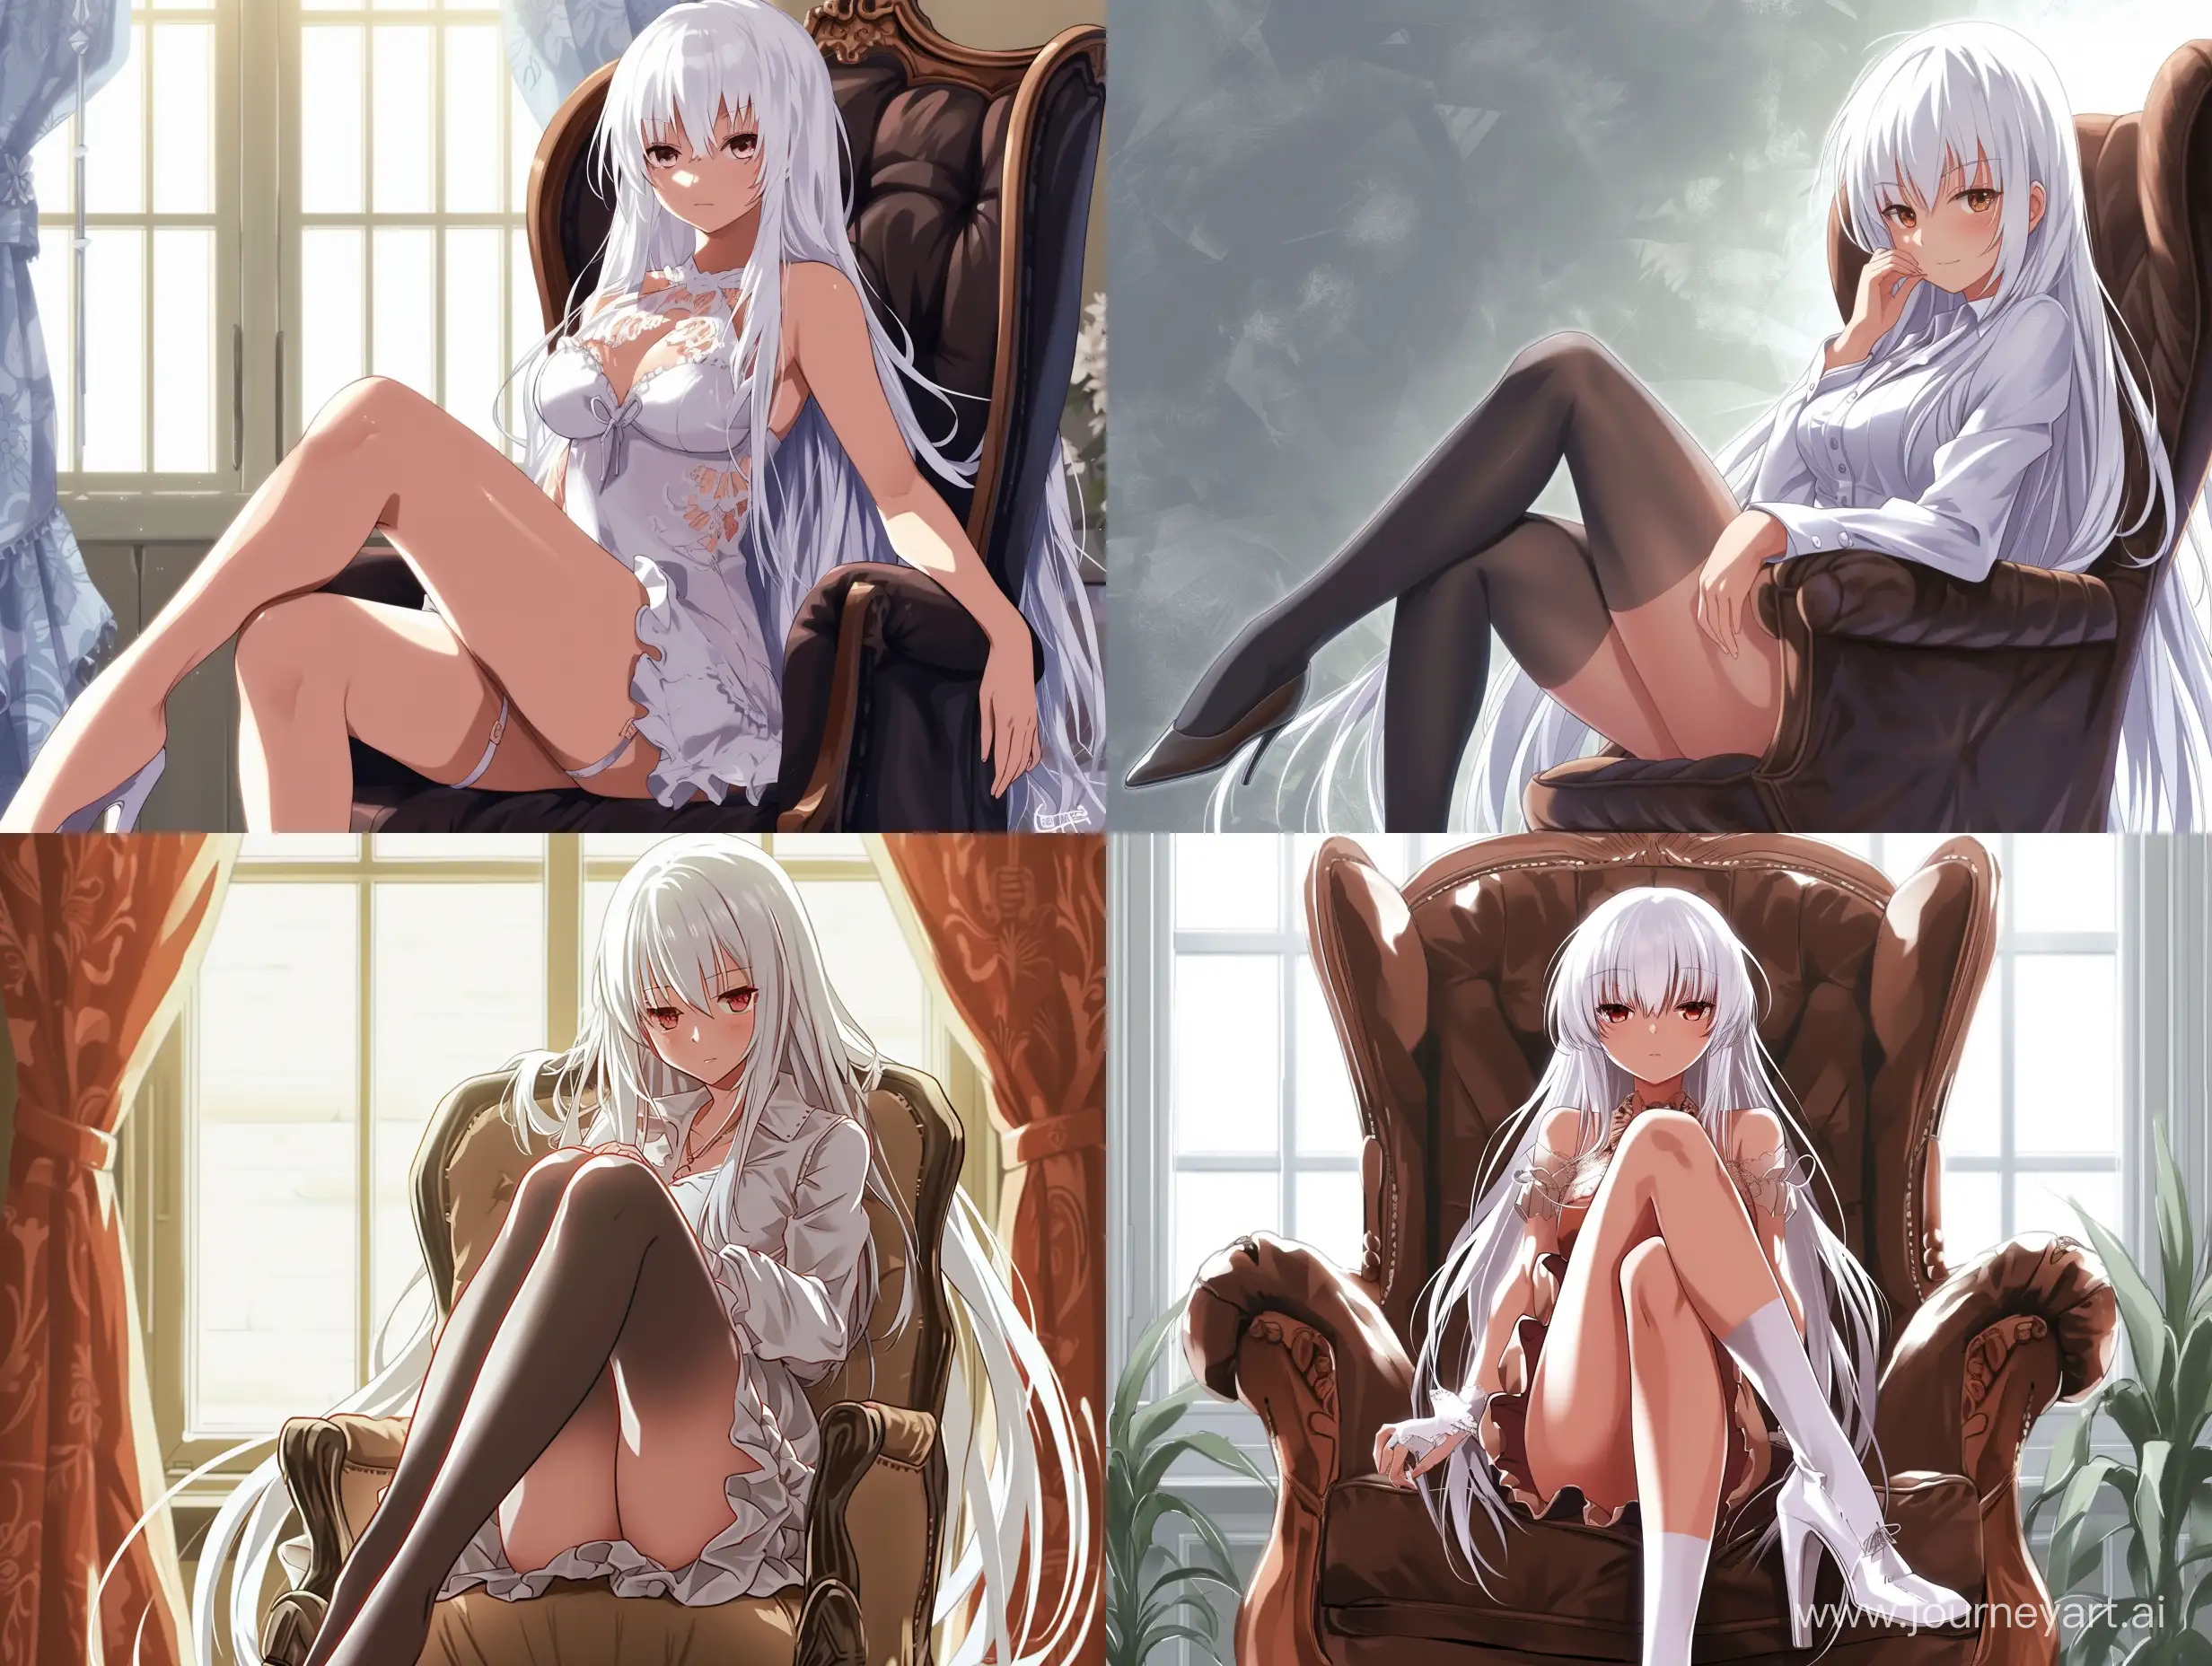 Serene-Anime-Girl-with-Long-White-Hair-Sitting-in-Chair